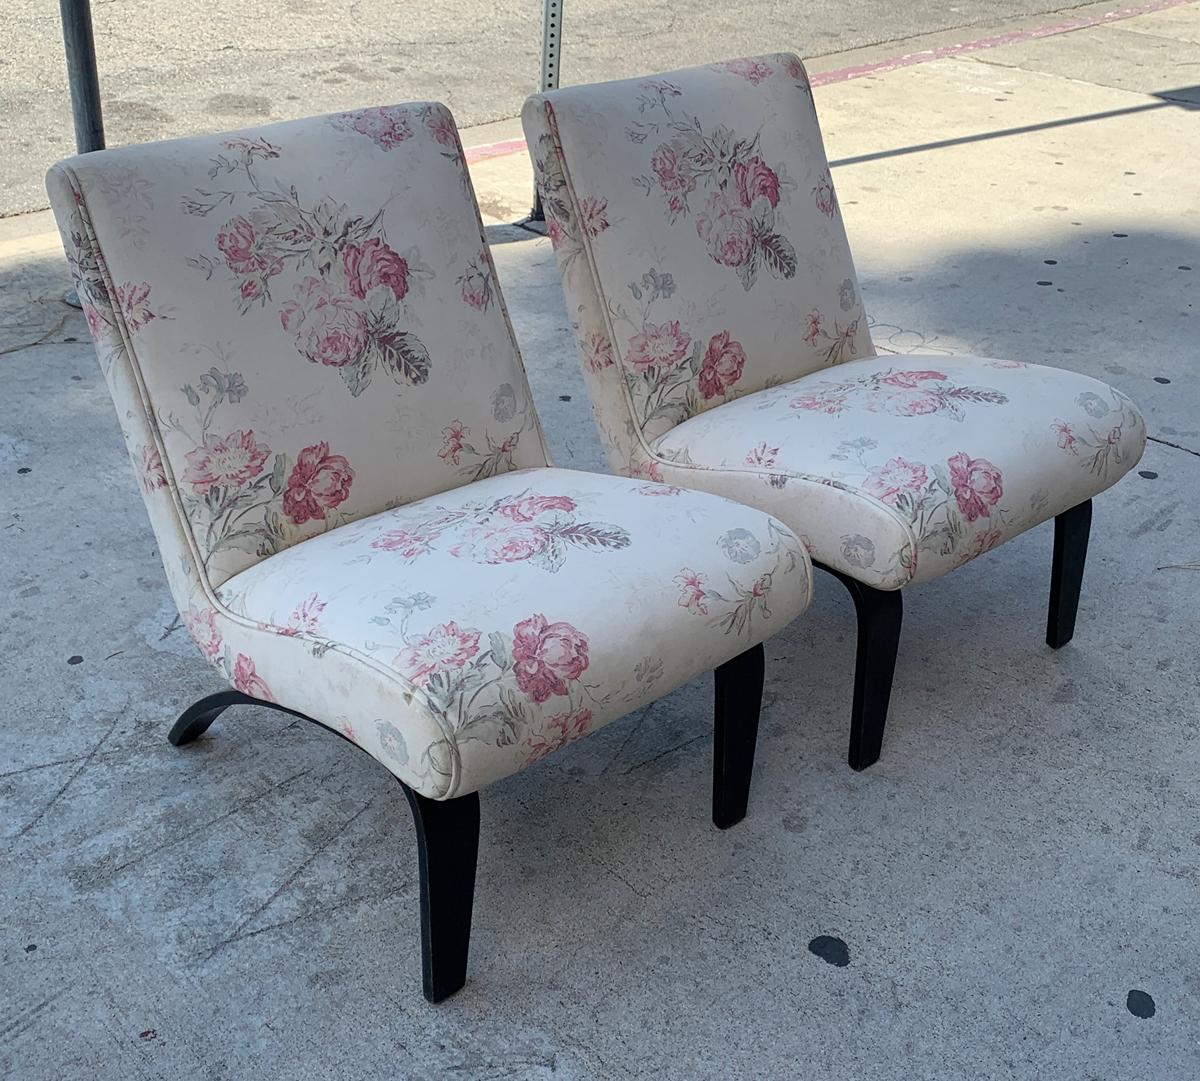 Beautiful pair of scoop chairs made in the USA and attributed to Milo Baughman.

The chairs have beautiful lines, bentwood legs and playful seats with curved forms.

The chairs are upholstered in a floral fabric and they are comfortable and